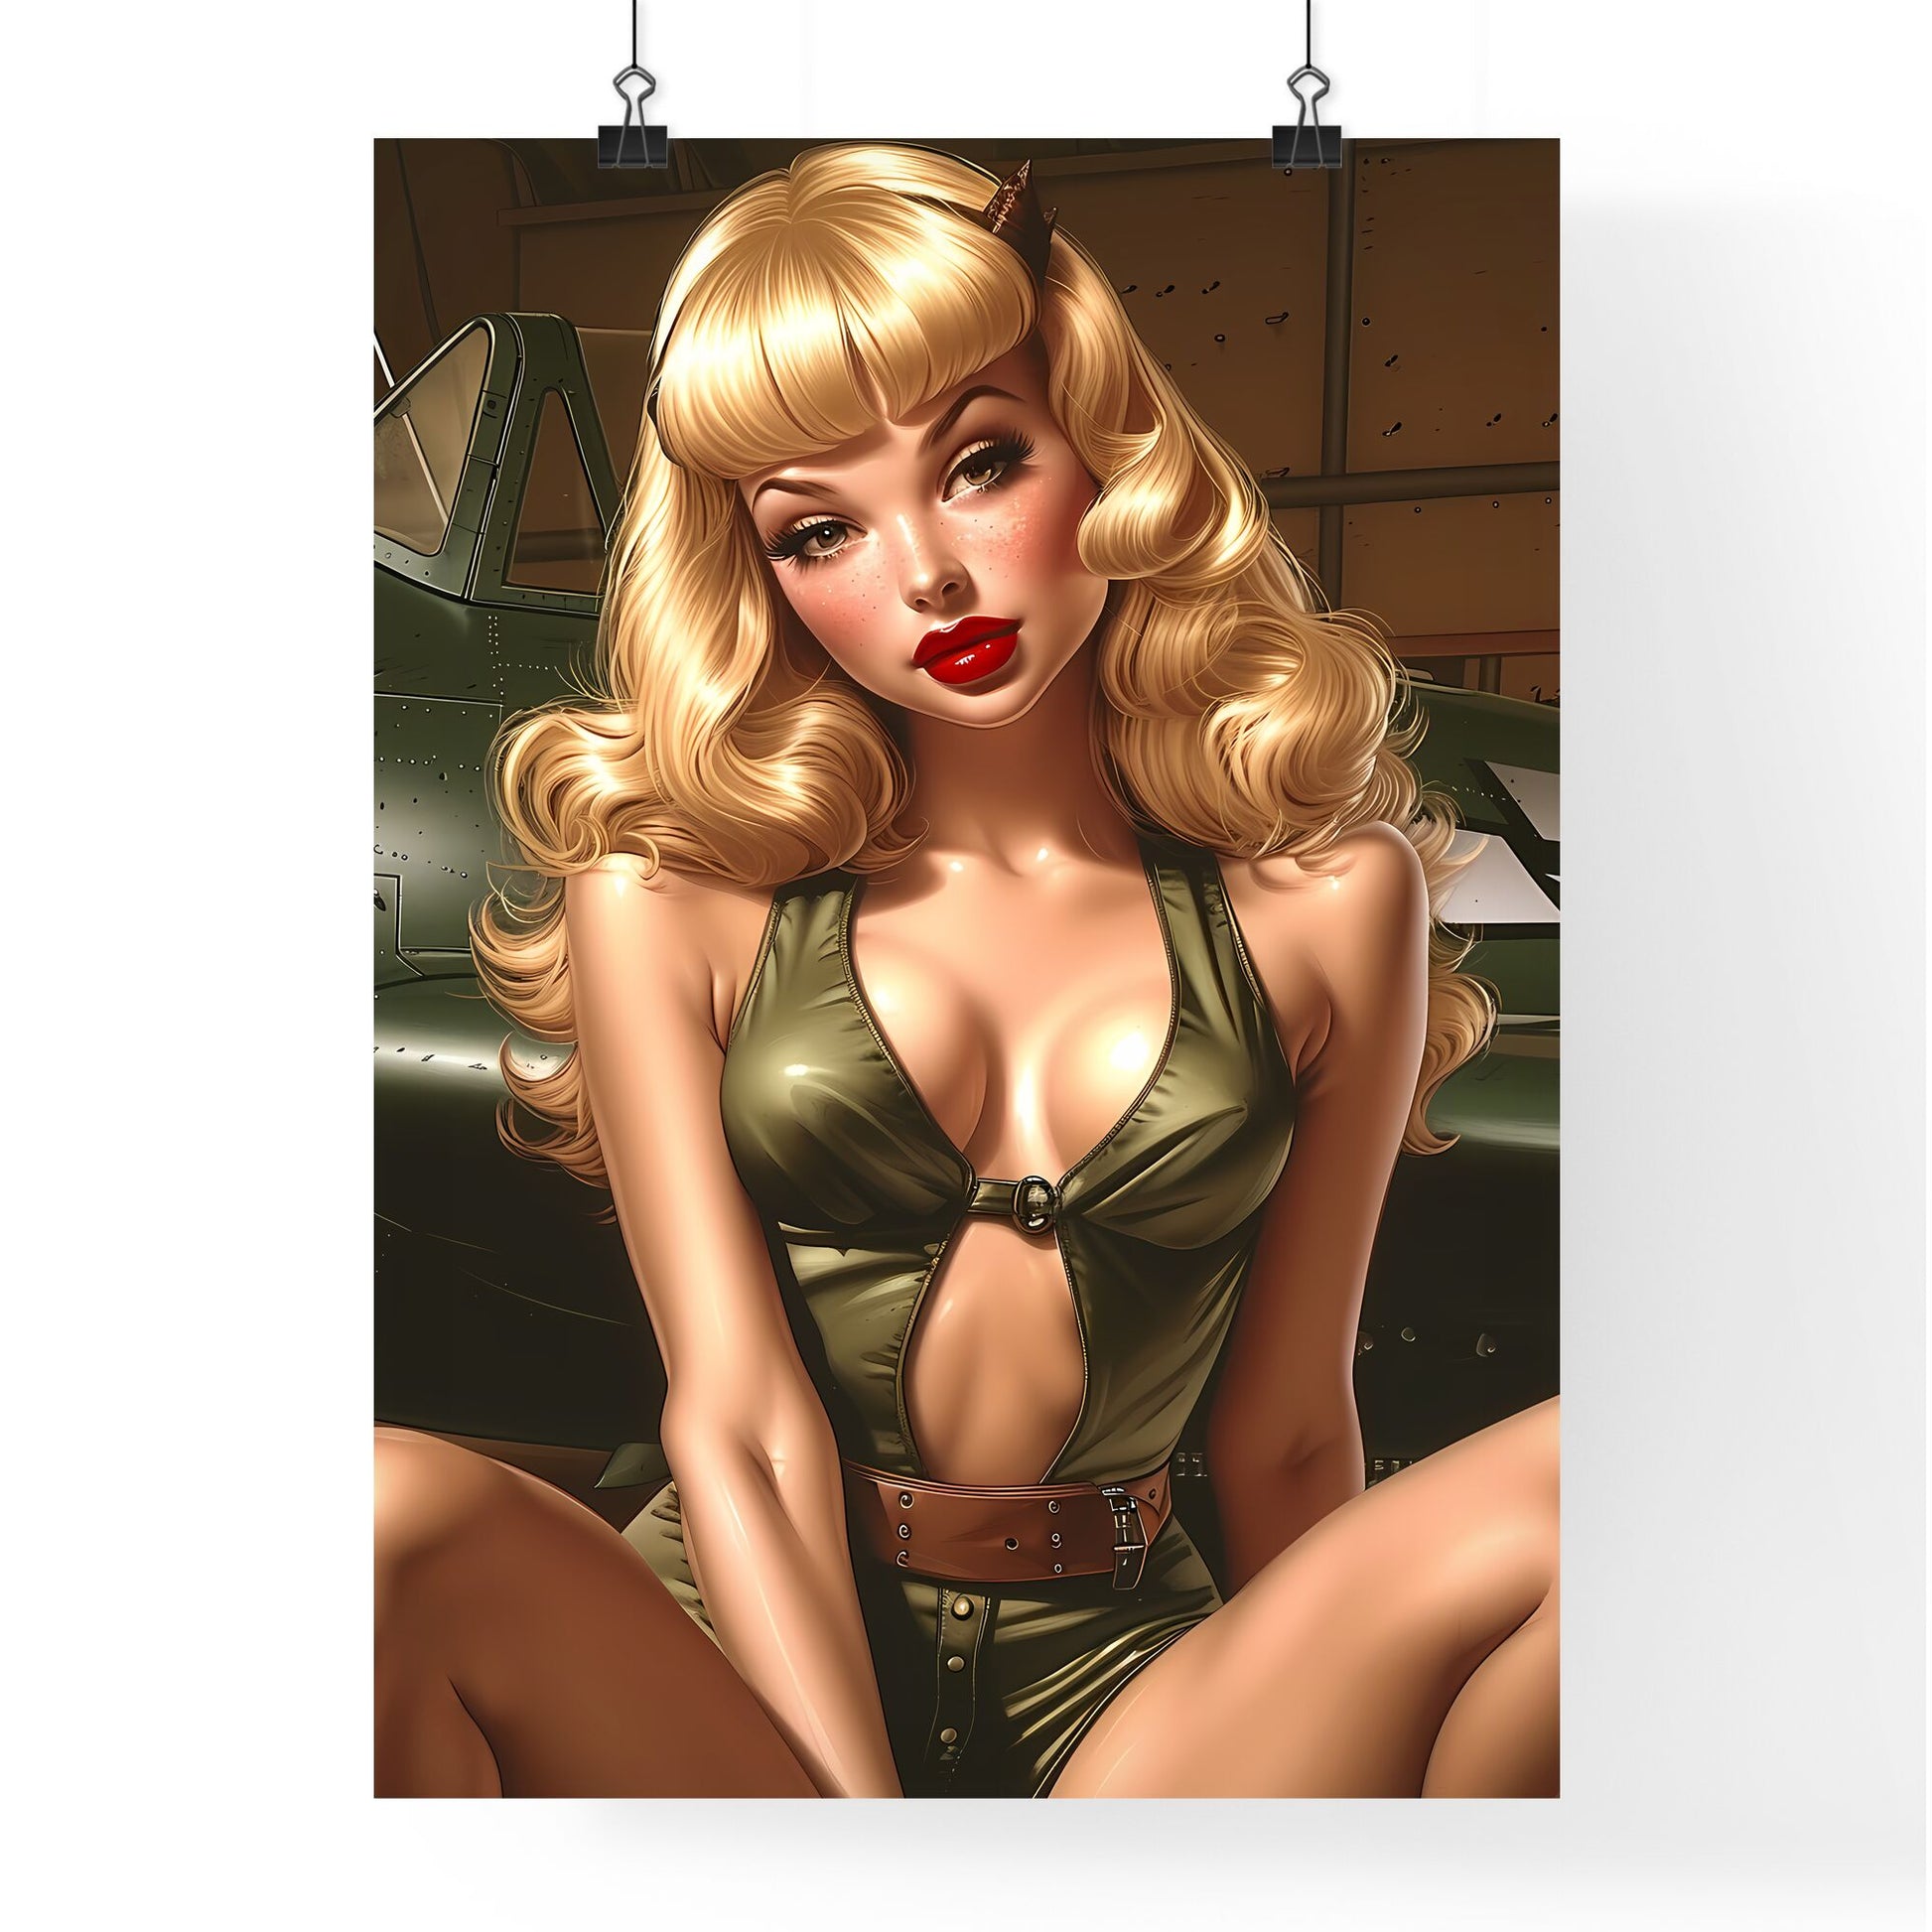 1950's pin up, has blond hair, red lipstick - Art print of a woman in a green outfit sitting on a green plane Default Title